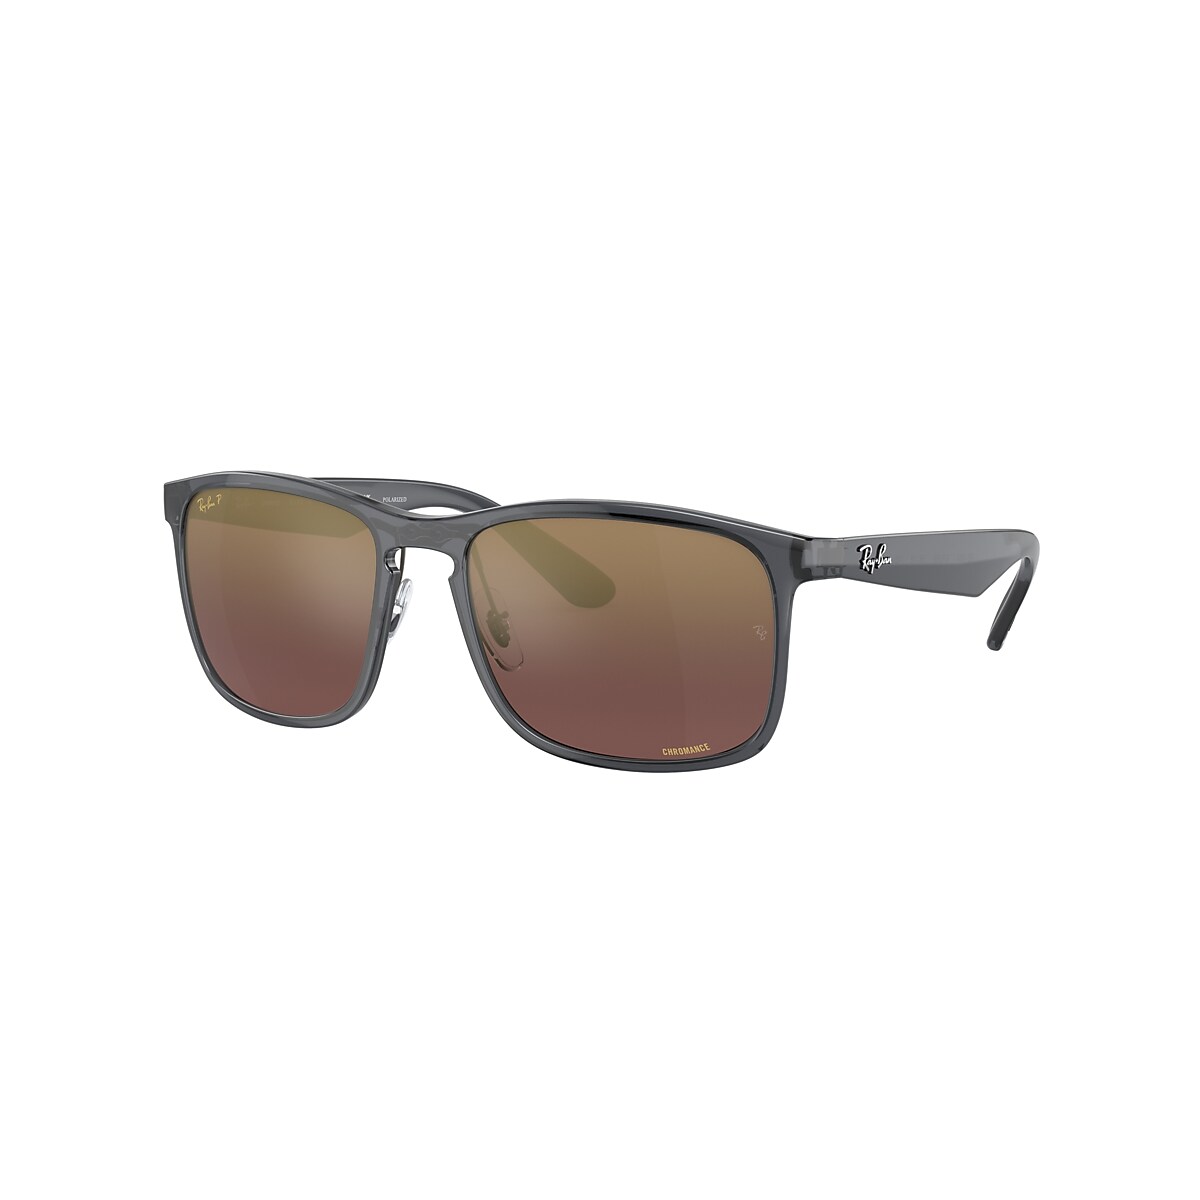 RB4264 CHROMANCE Sunglasses in Grey and Purple - RB4264 | Ray-Ban® US